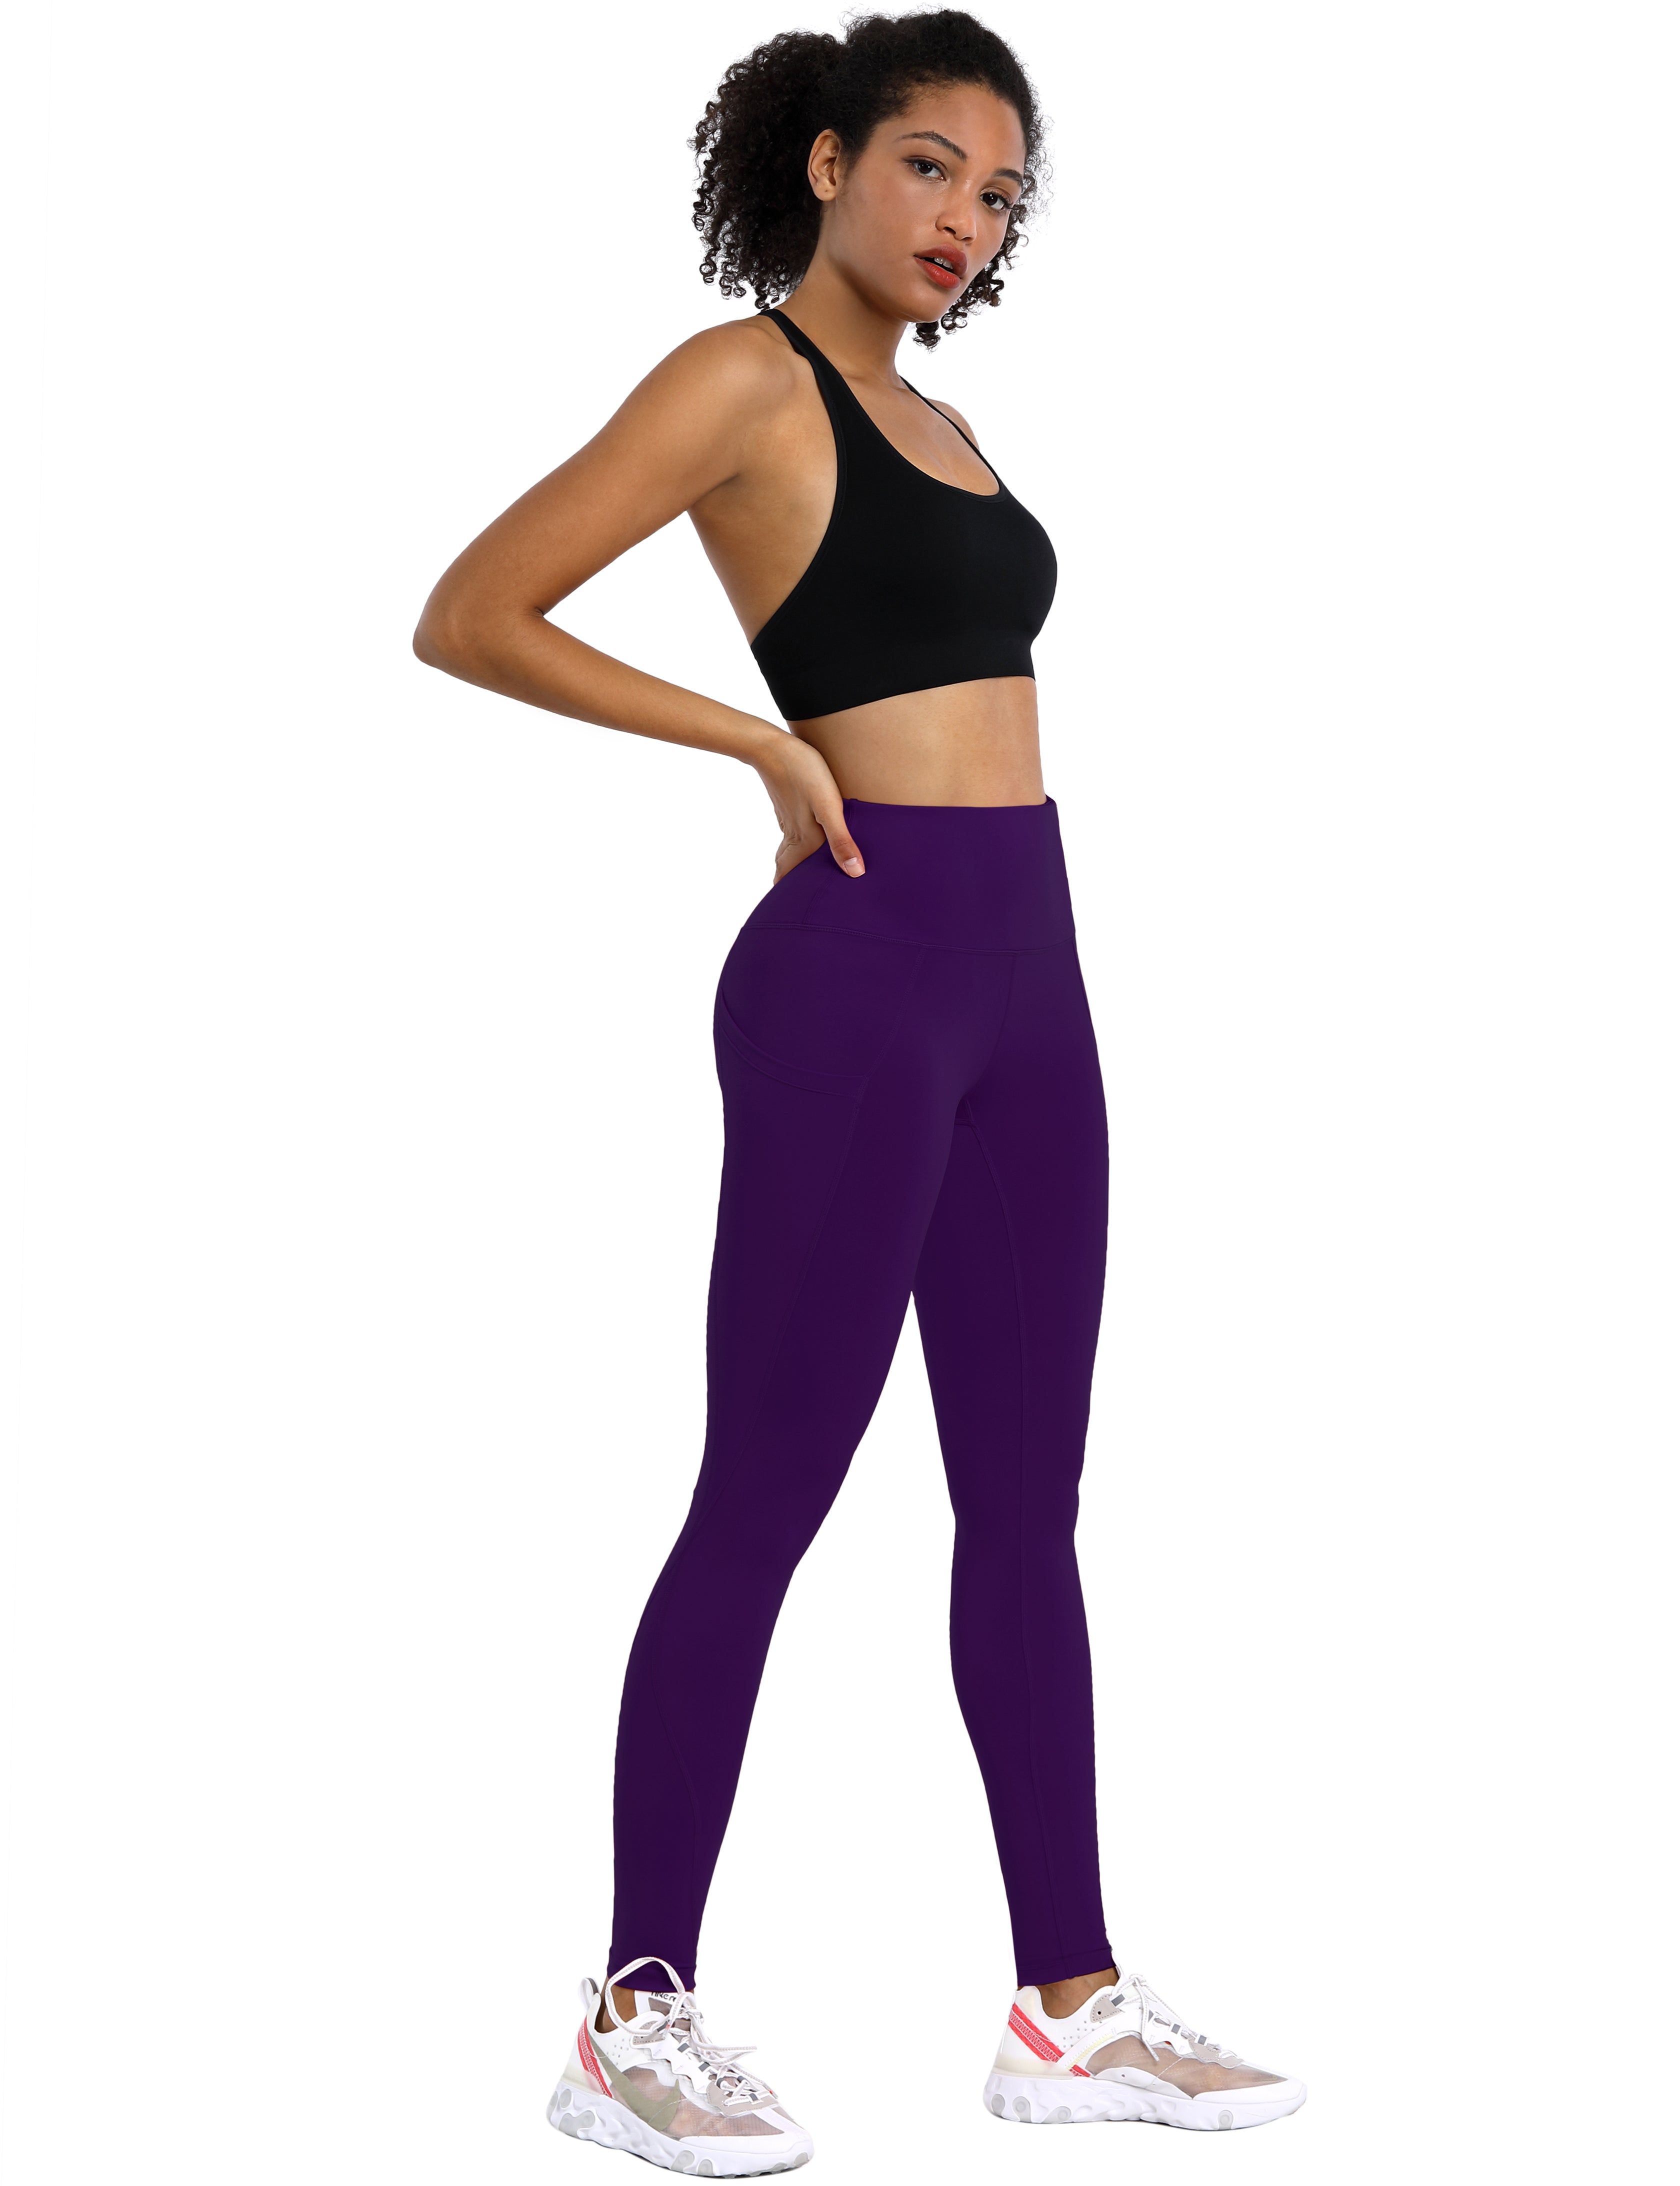 High Waist Side Pockets Yoga Pants pansypurple 75% Nylon, 25% Spandex Fabric doesn't attract lint easily 4-way stretch No see-through Moisture-wicking Tummy control Inner pocket